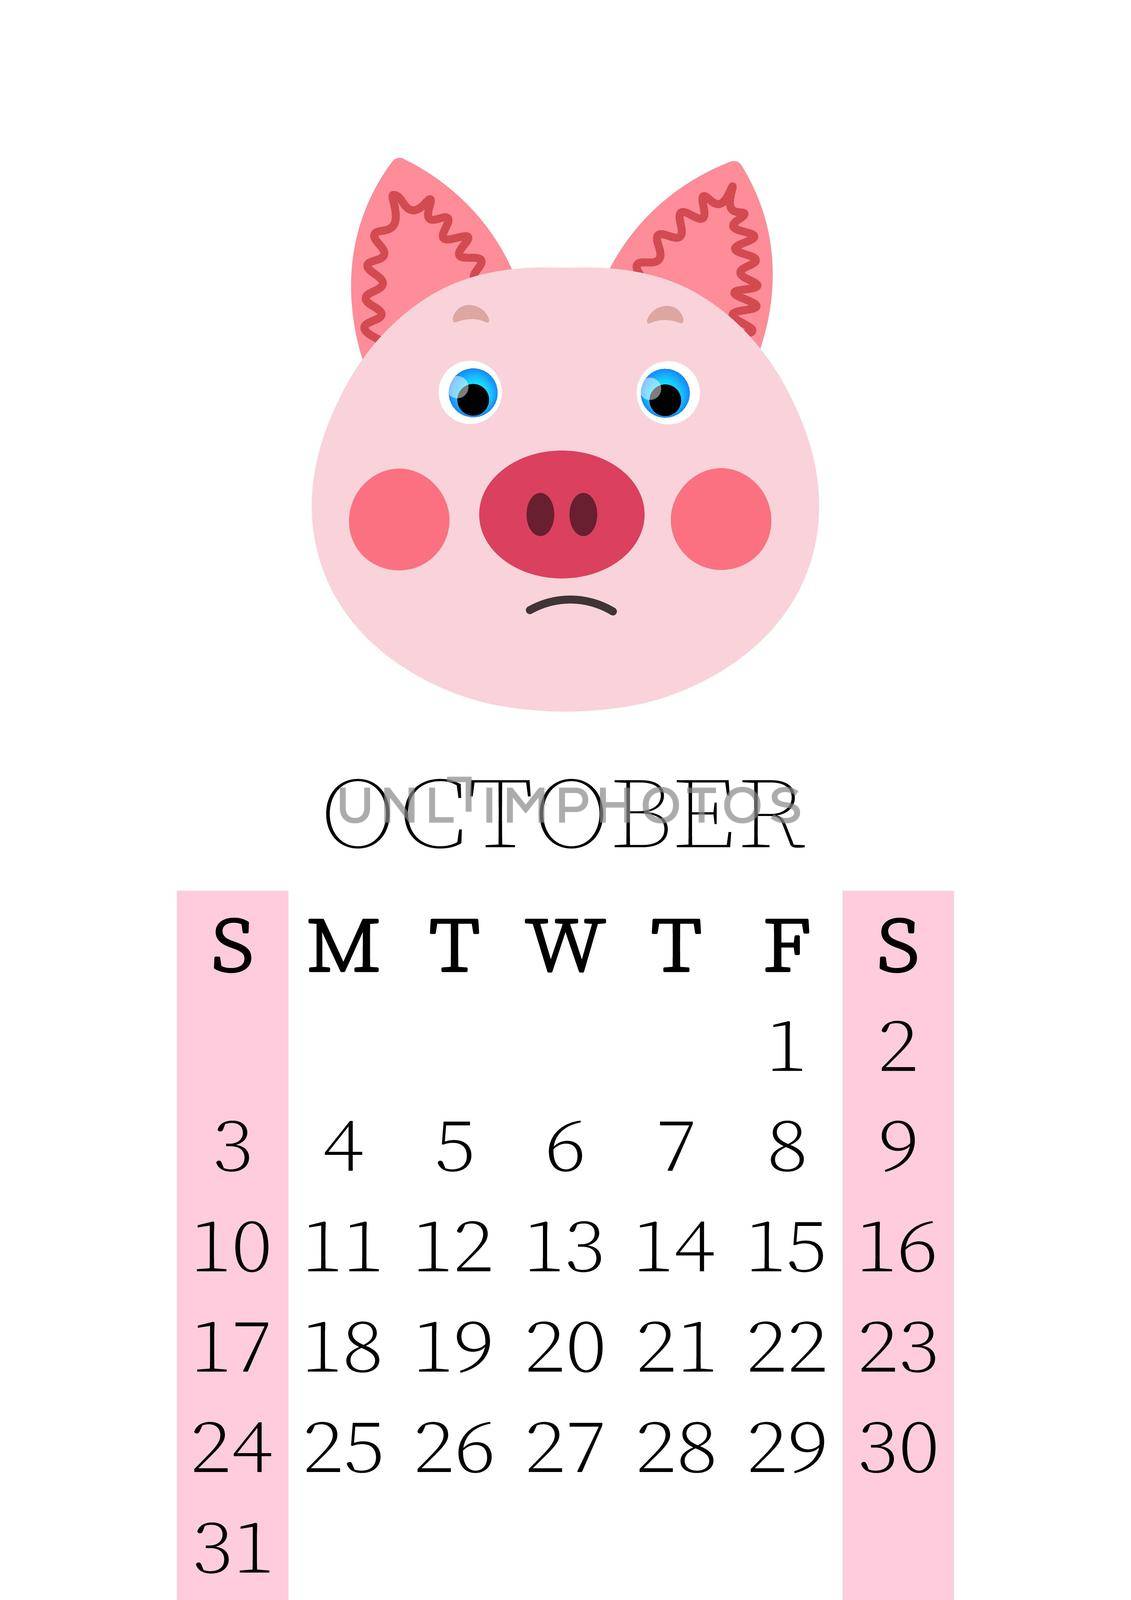 Calendar 2021. Monthly calendar for October 2021 from Sunday to Saturday. Yearly Planner. Templates with cute hand drawn face animals. Vector illustration. Great for kids. Calendar page for print.